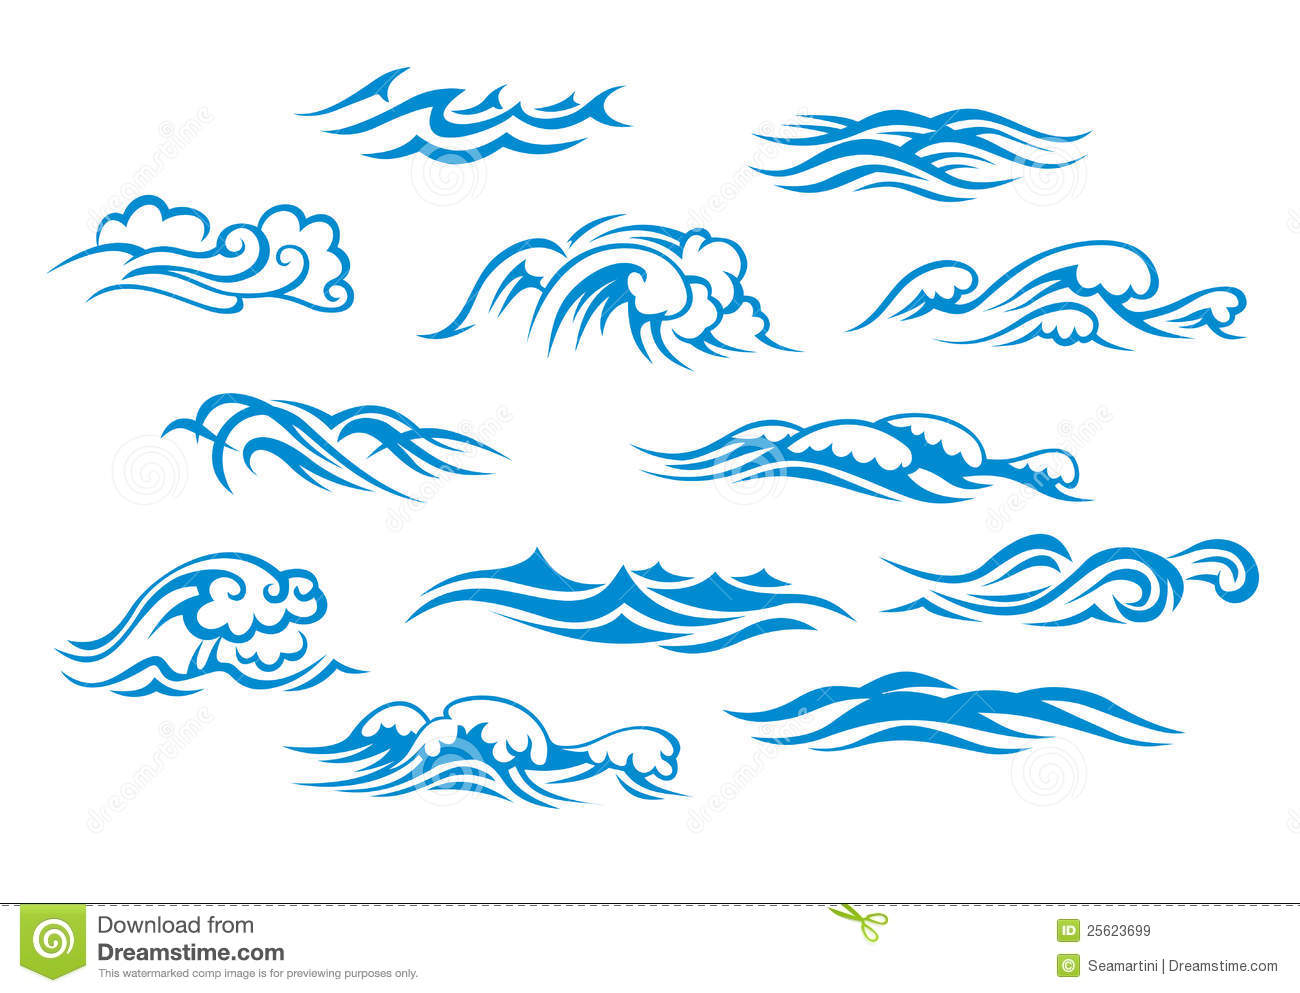 Ocean And Sea Waves Royalty Free Stock Images   Image  25623699